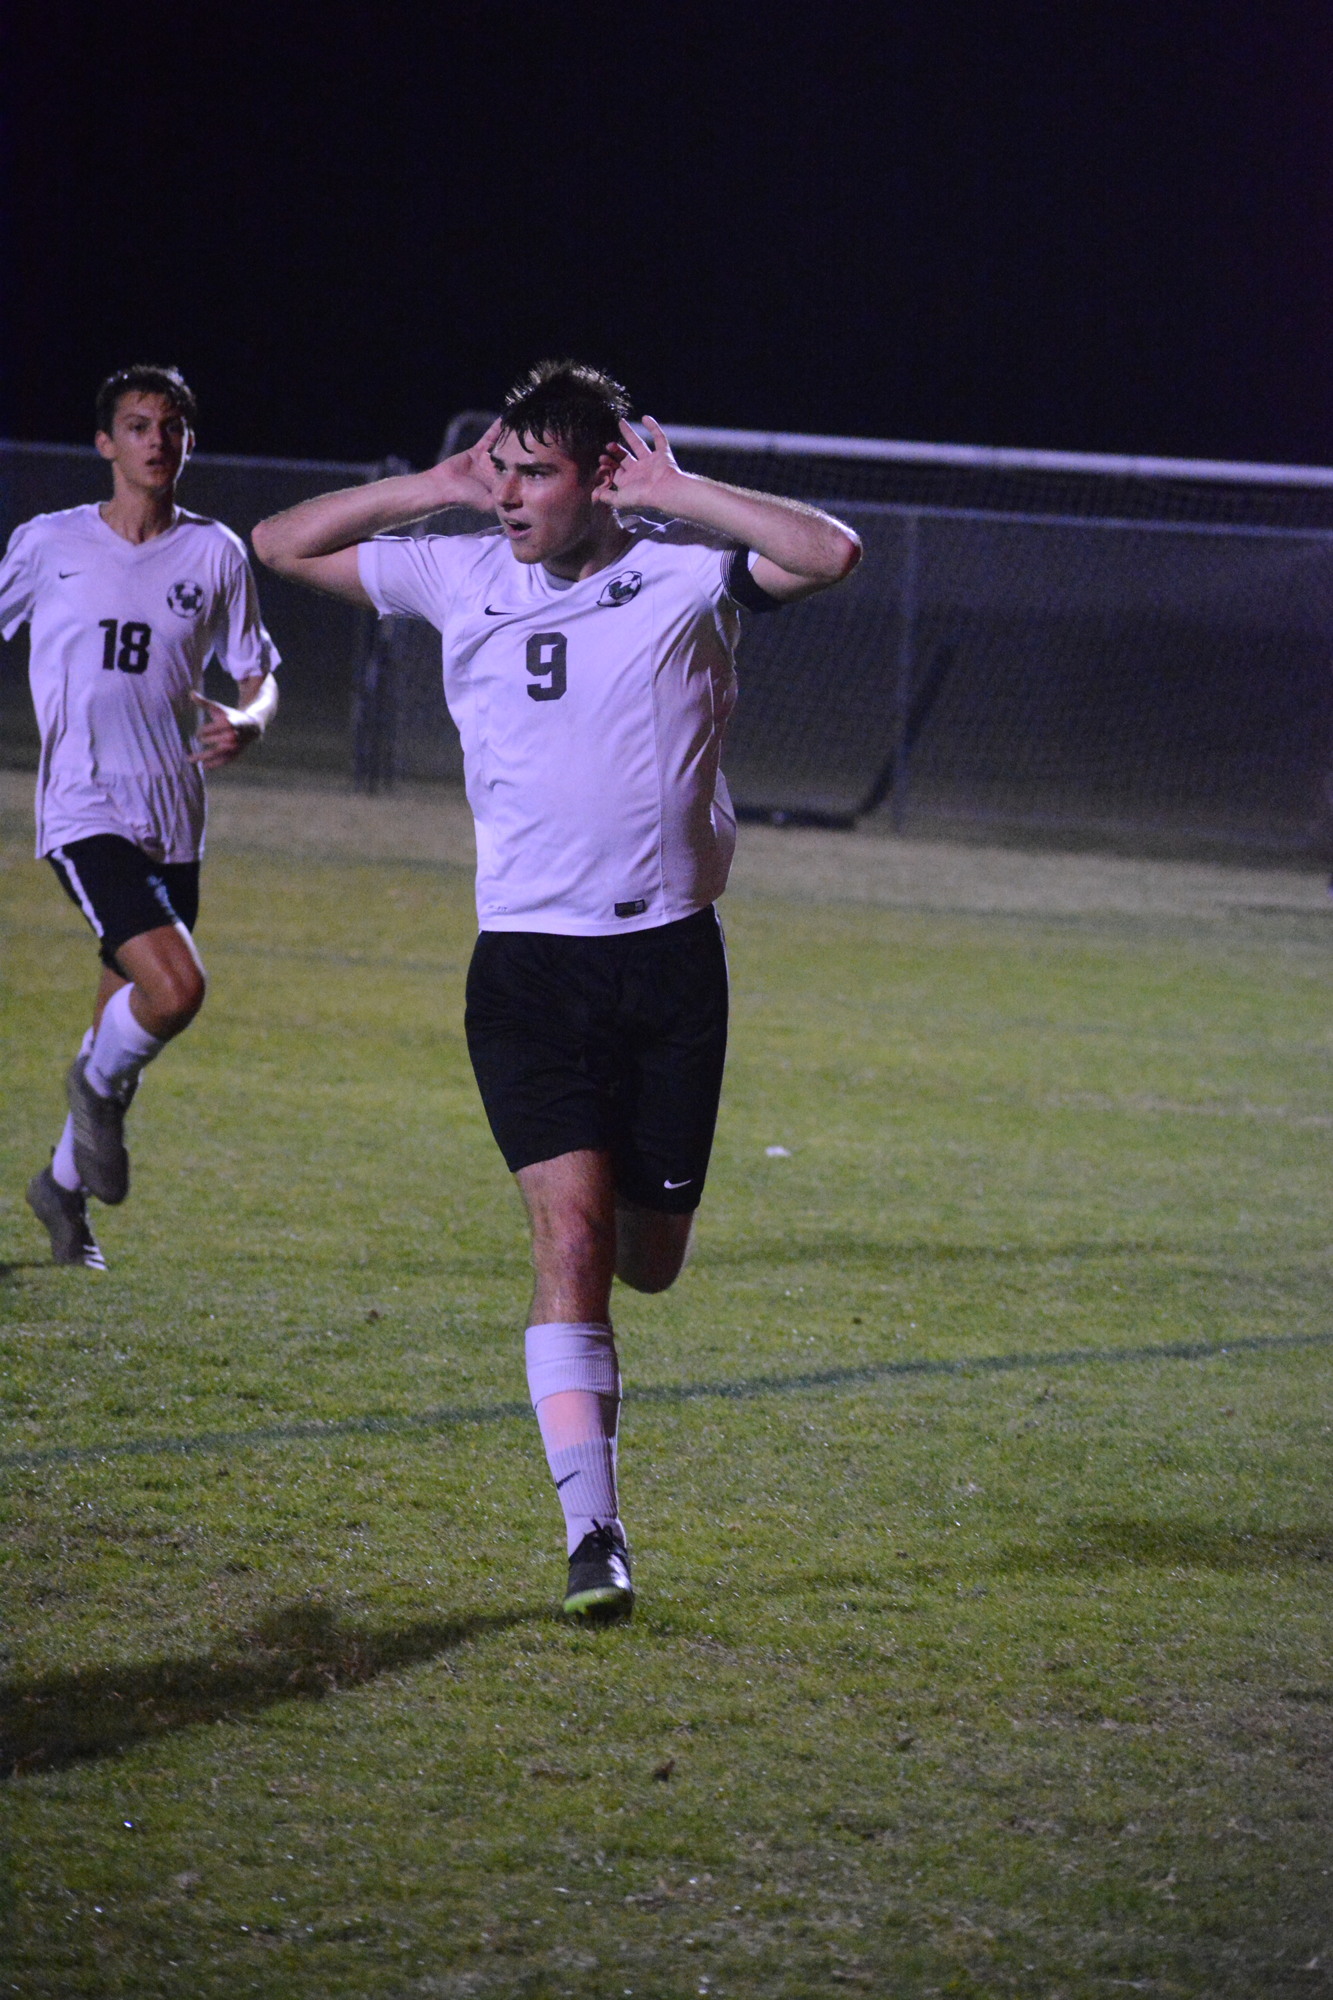 Travis Freeman celebrates scoring a goal for Lakewood Ranch in the second half. It would be the Mustangs' only goal of the game.